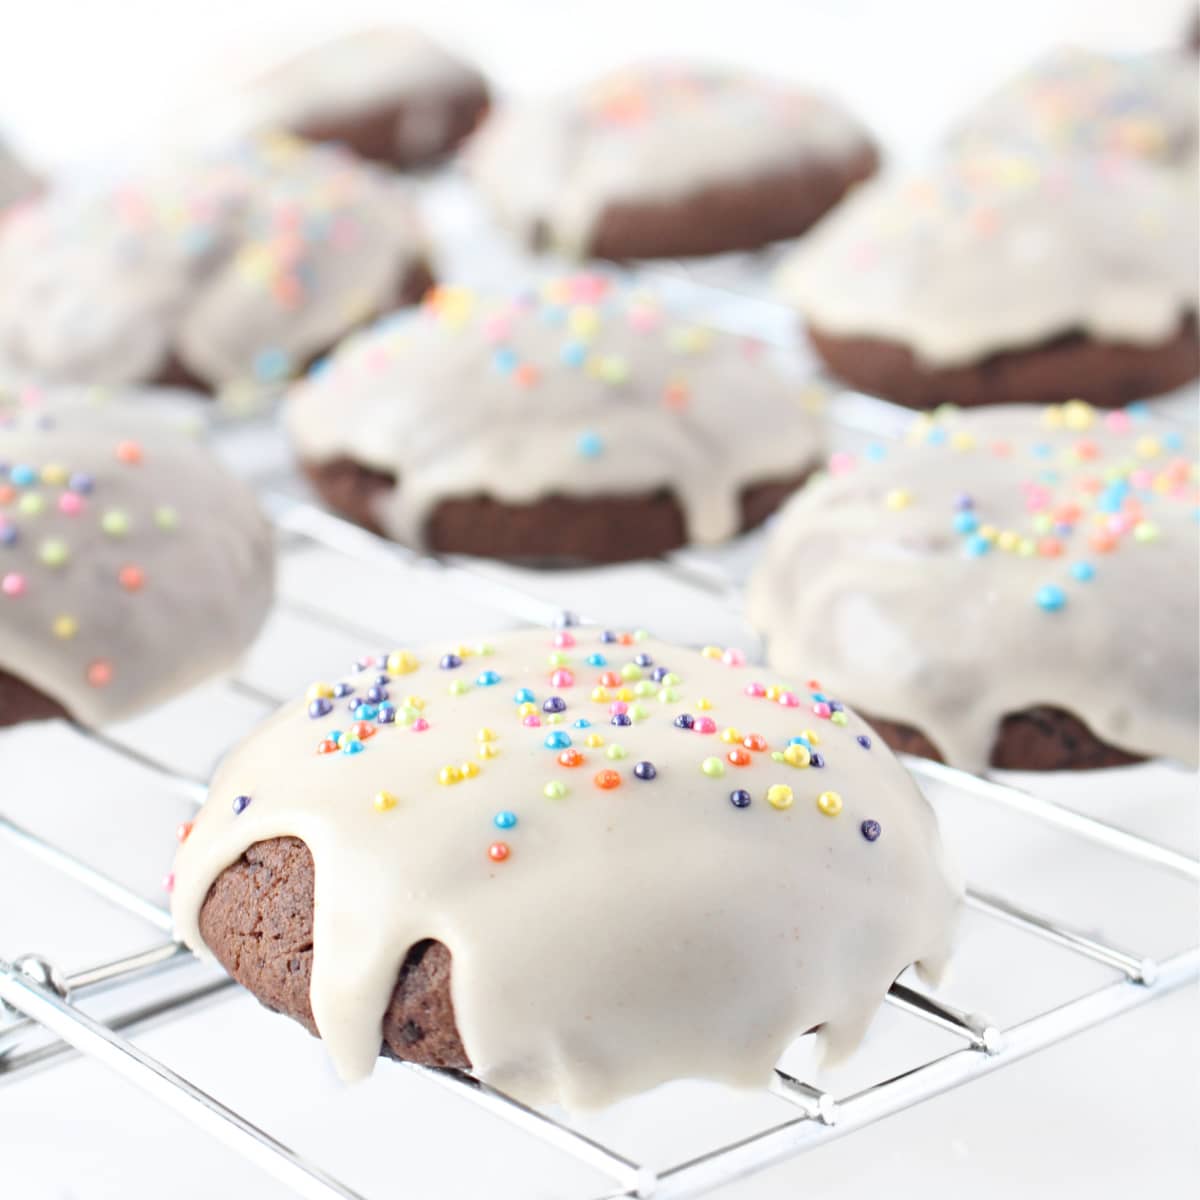 Closeup of chocolate cookie coated in white icing with multicolored nonpareil sprinkles.